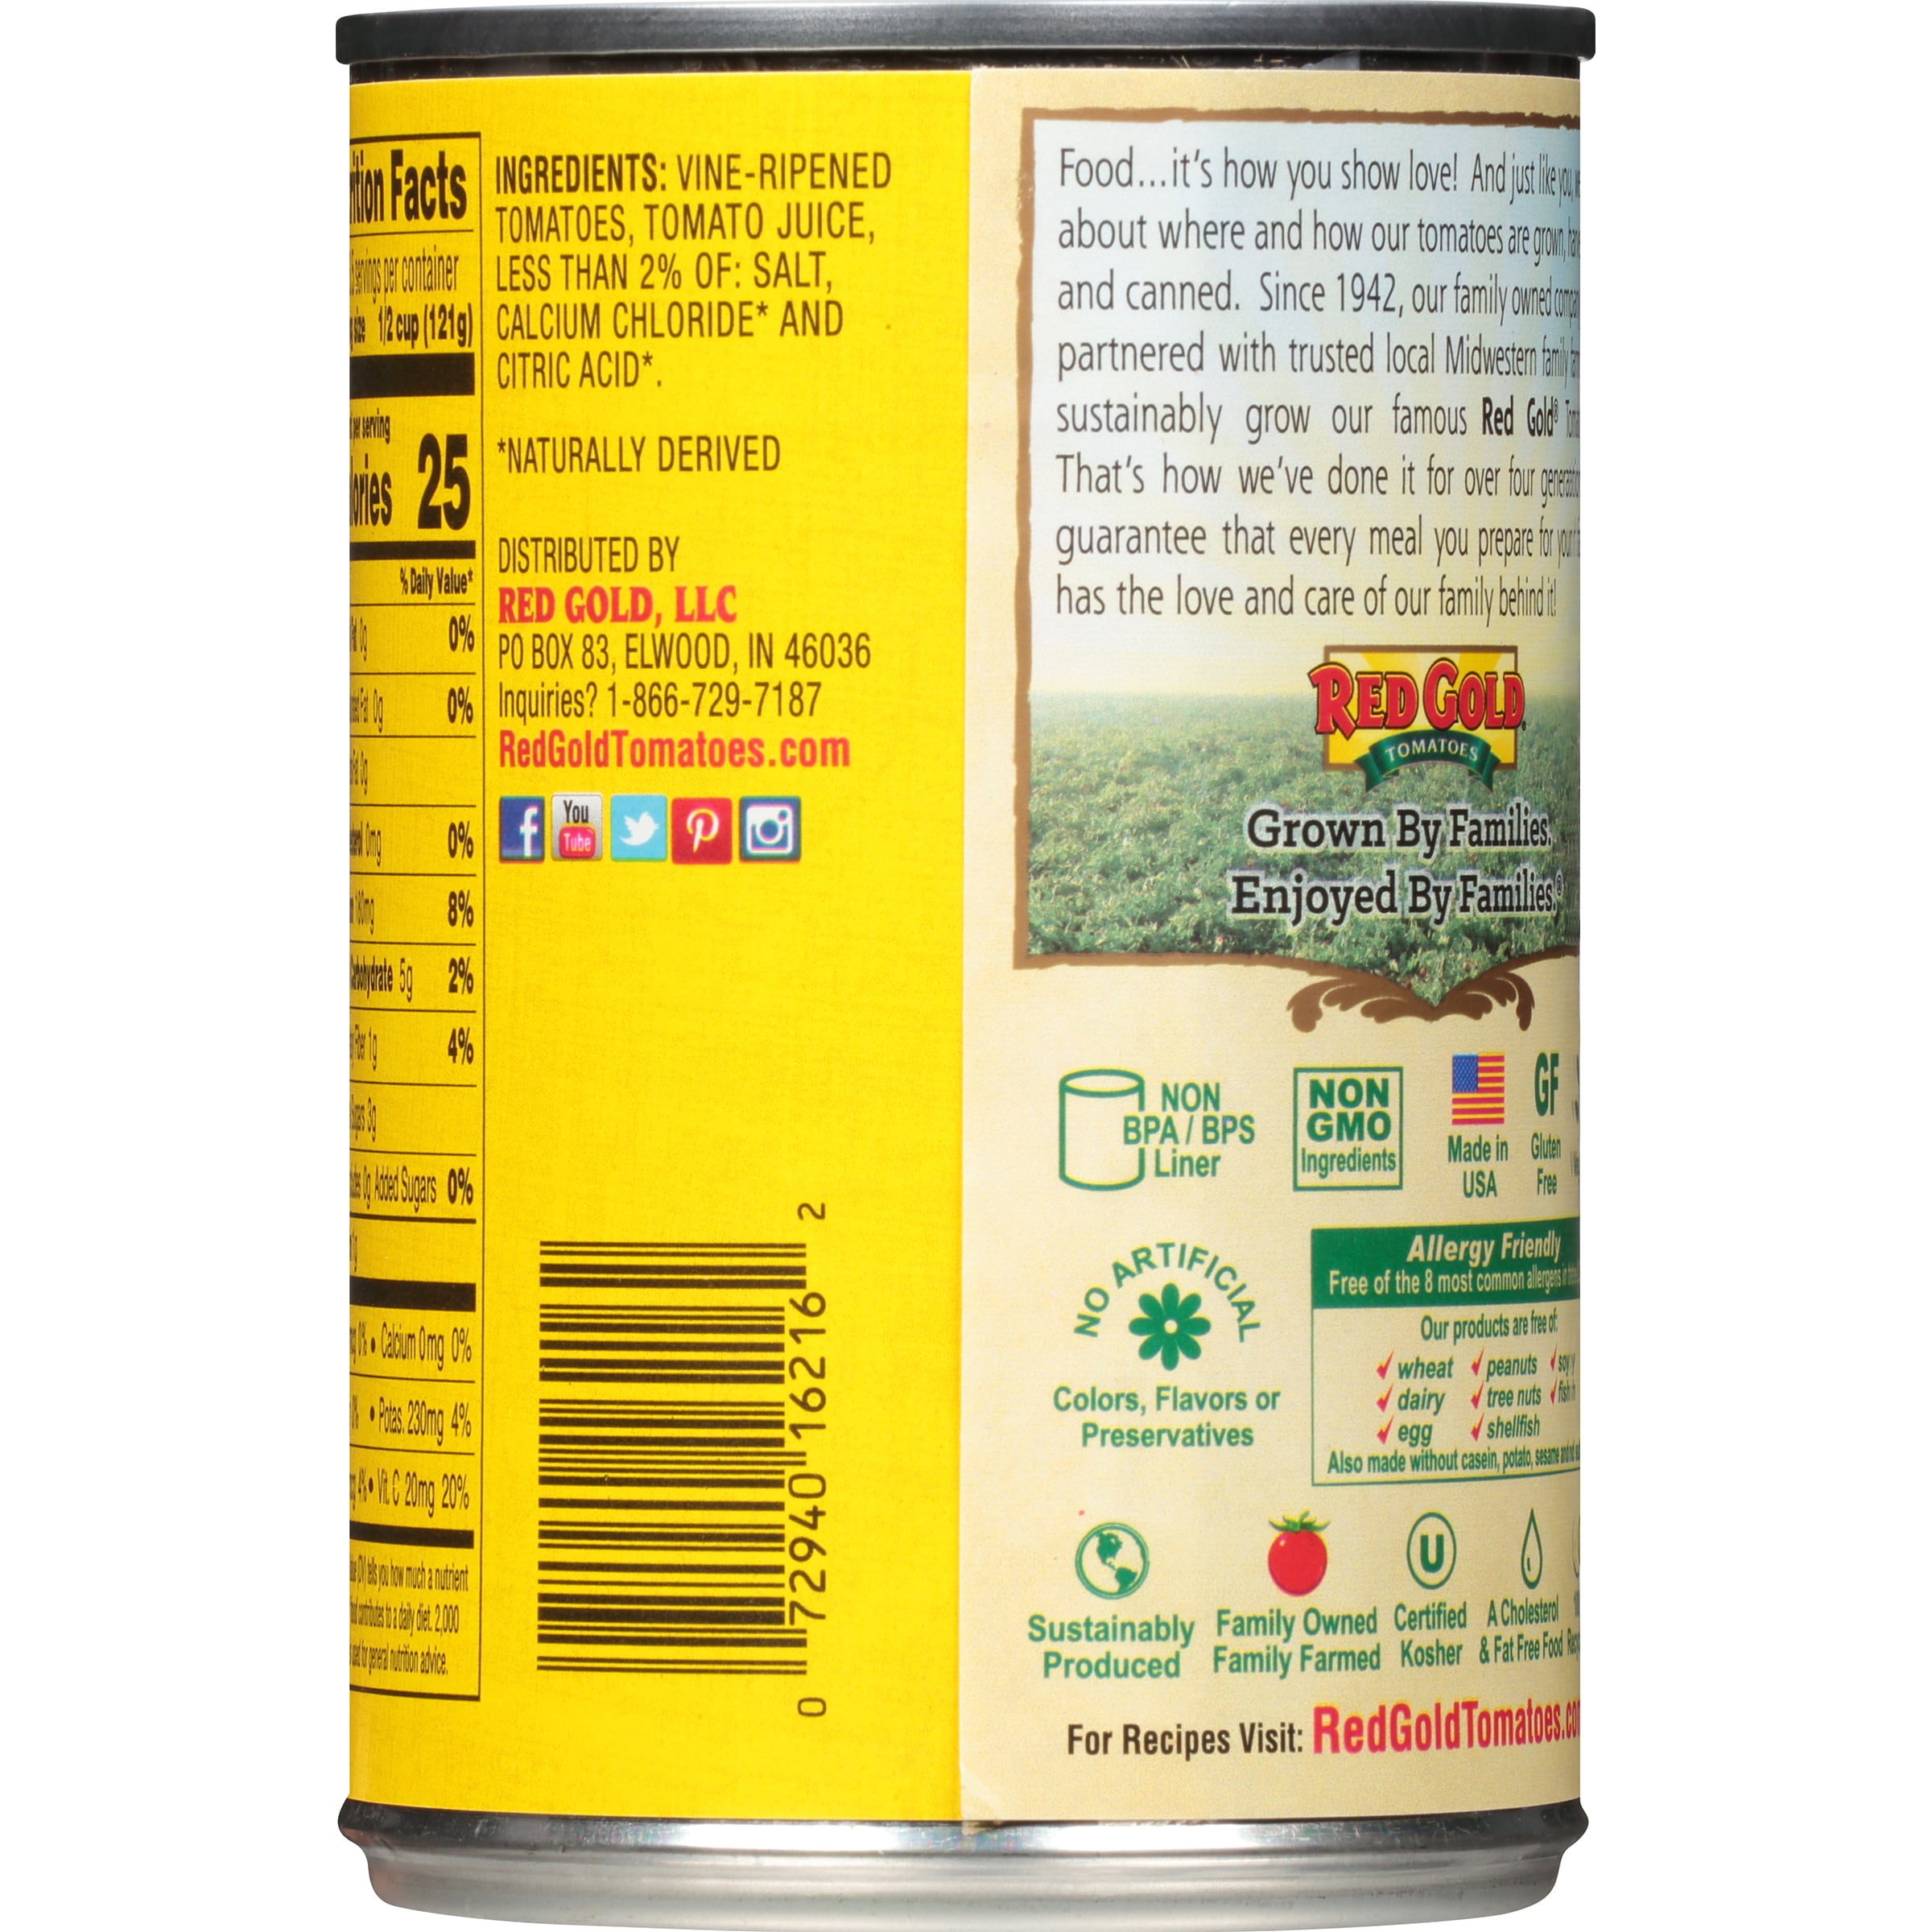 32 Canned Tomatoes Nutrition Label - Labels Database 2020